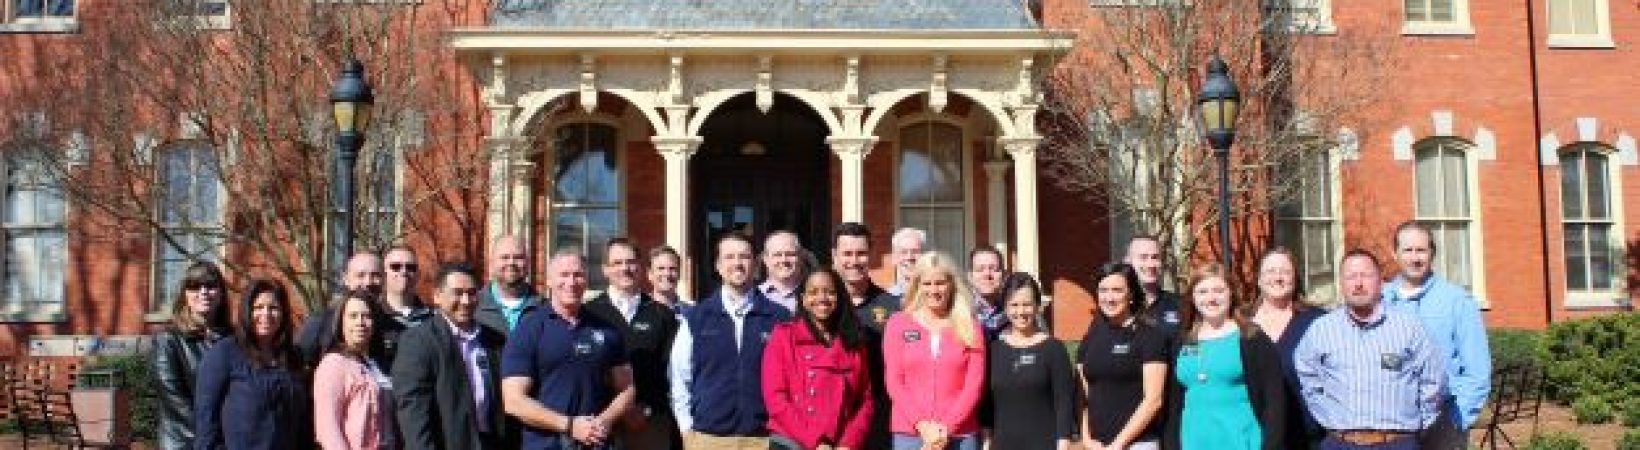 Group of professionals in front of Historic Union County Courthouse